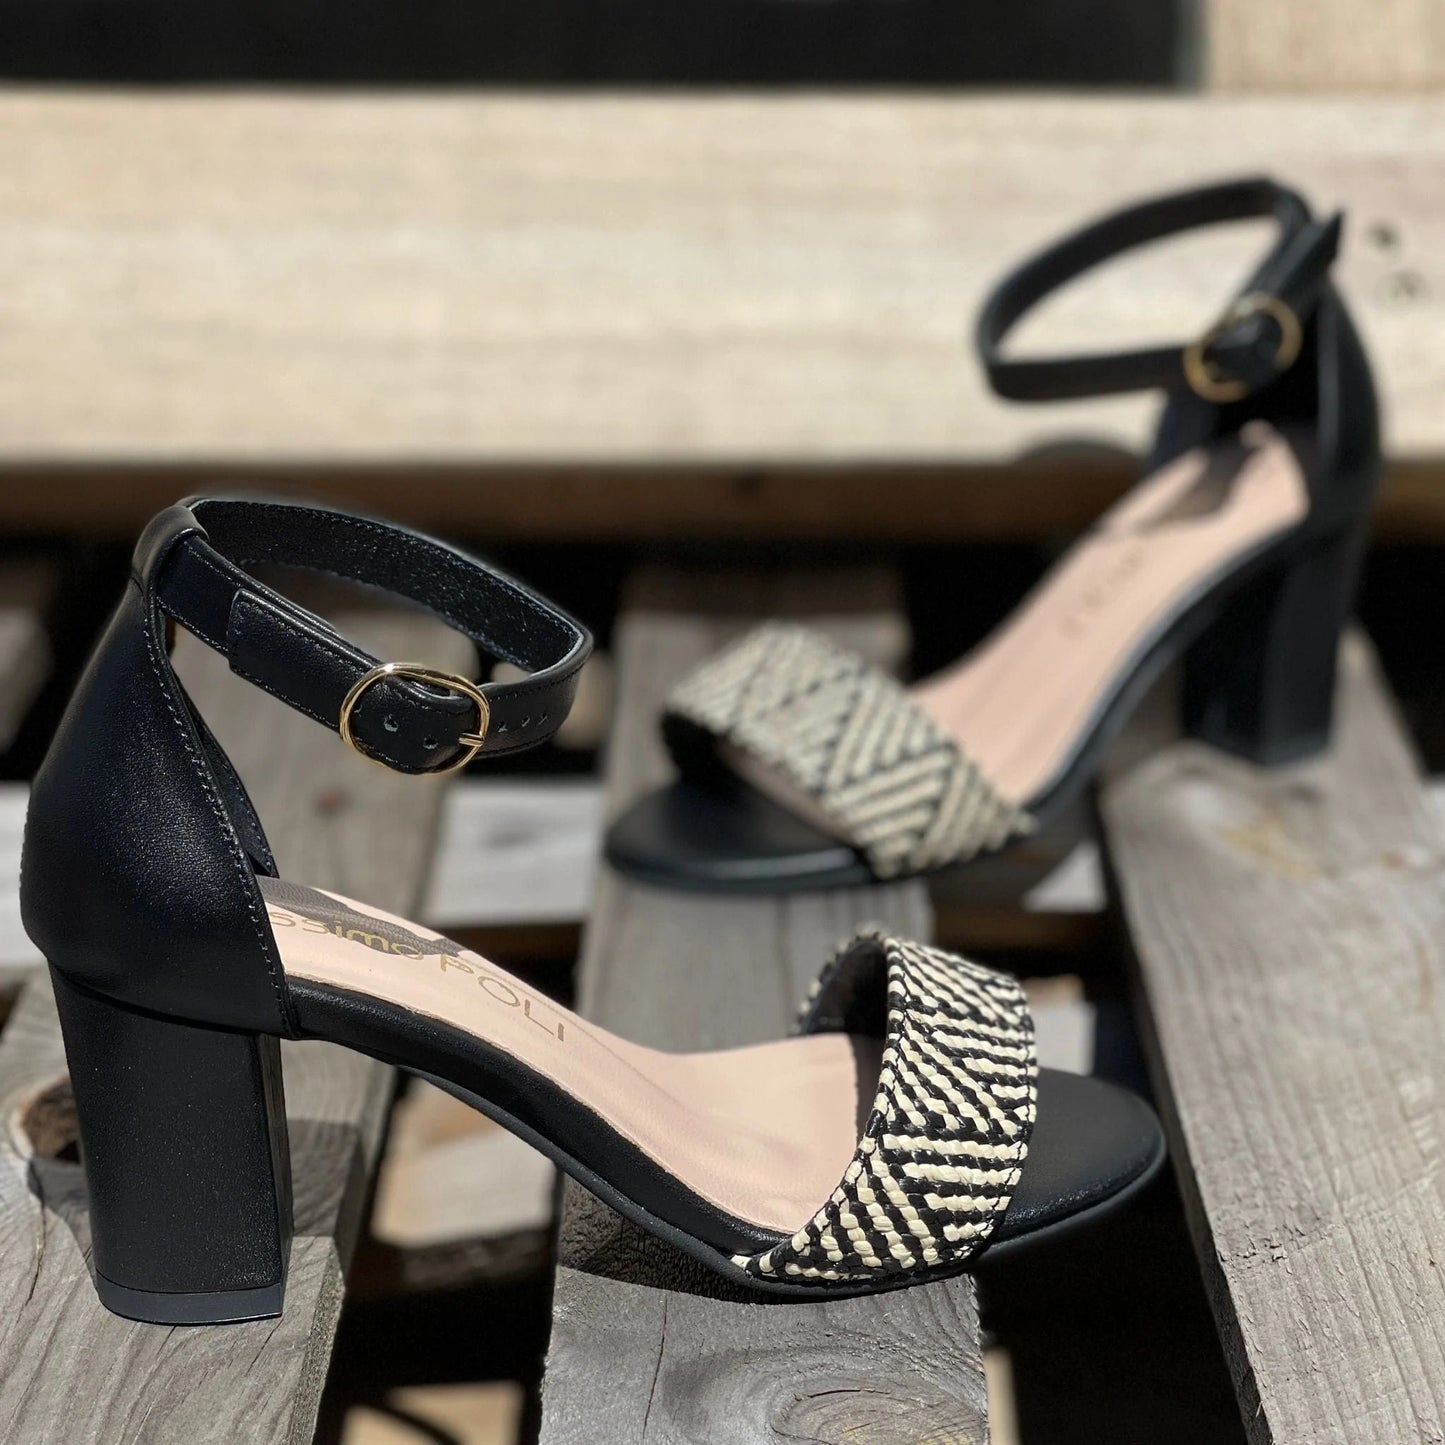 Ankle strap sandals in black leather.